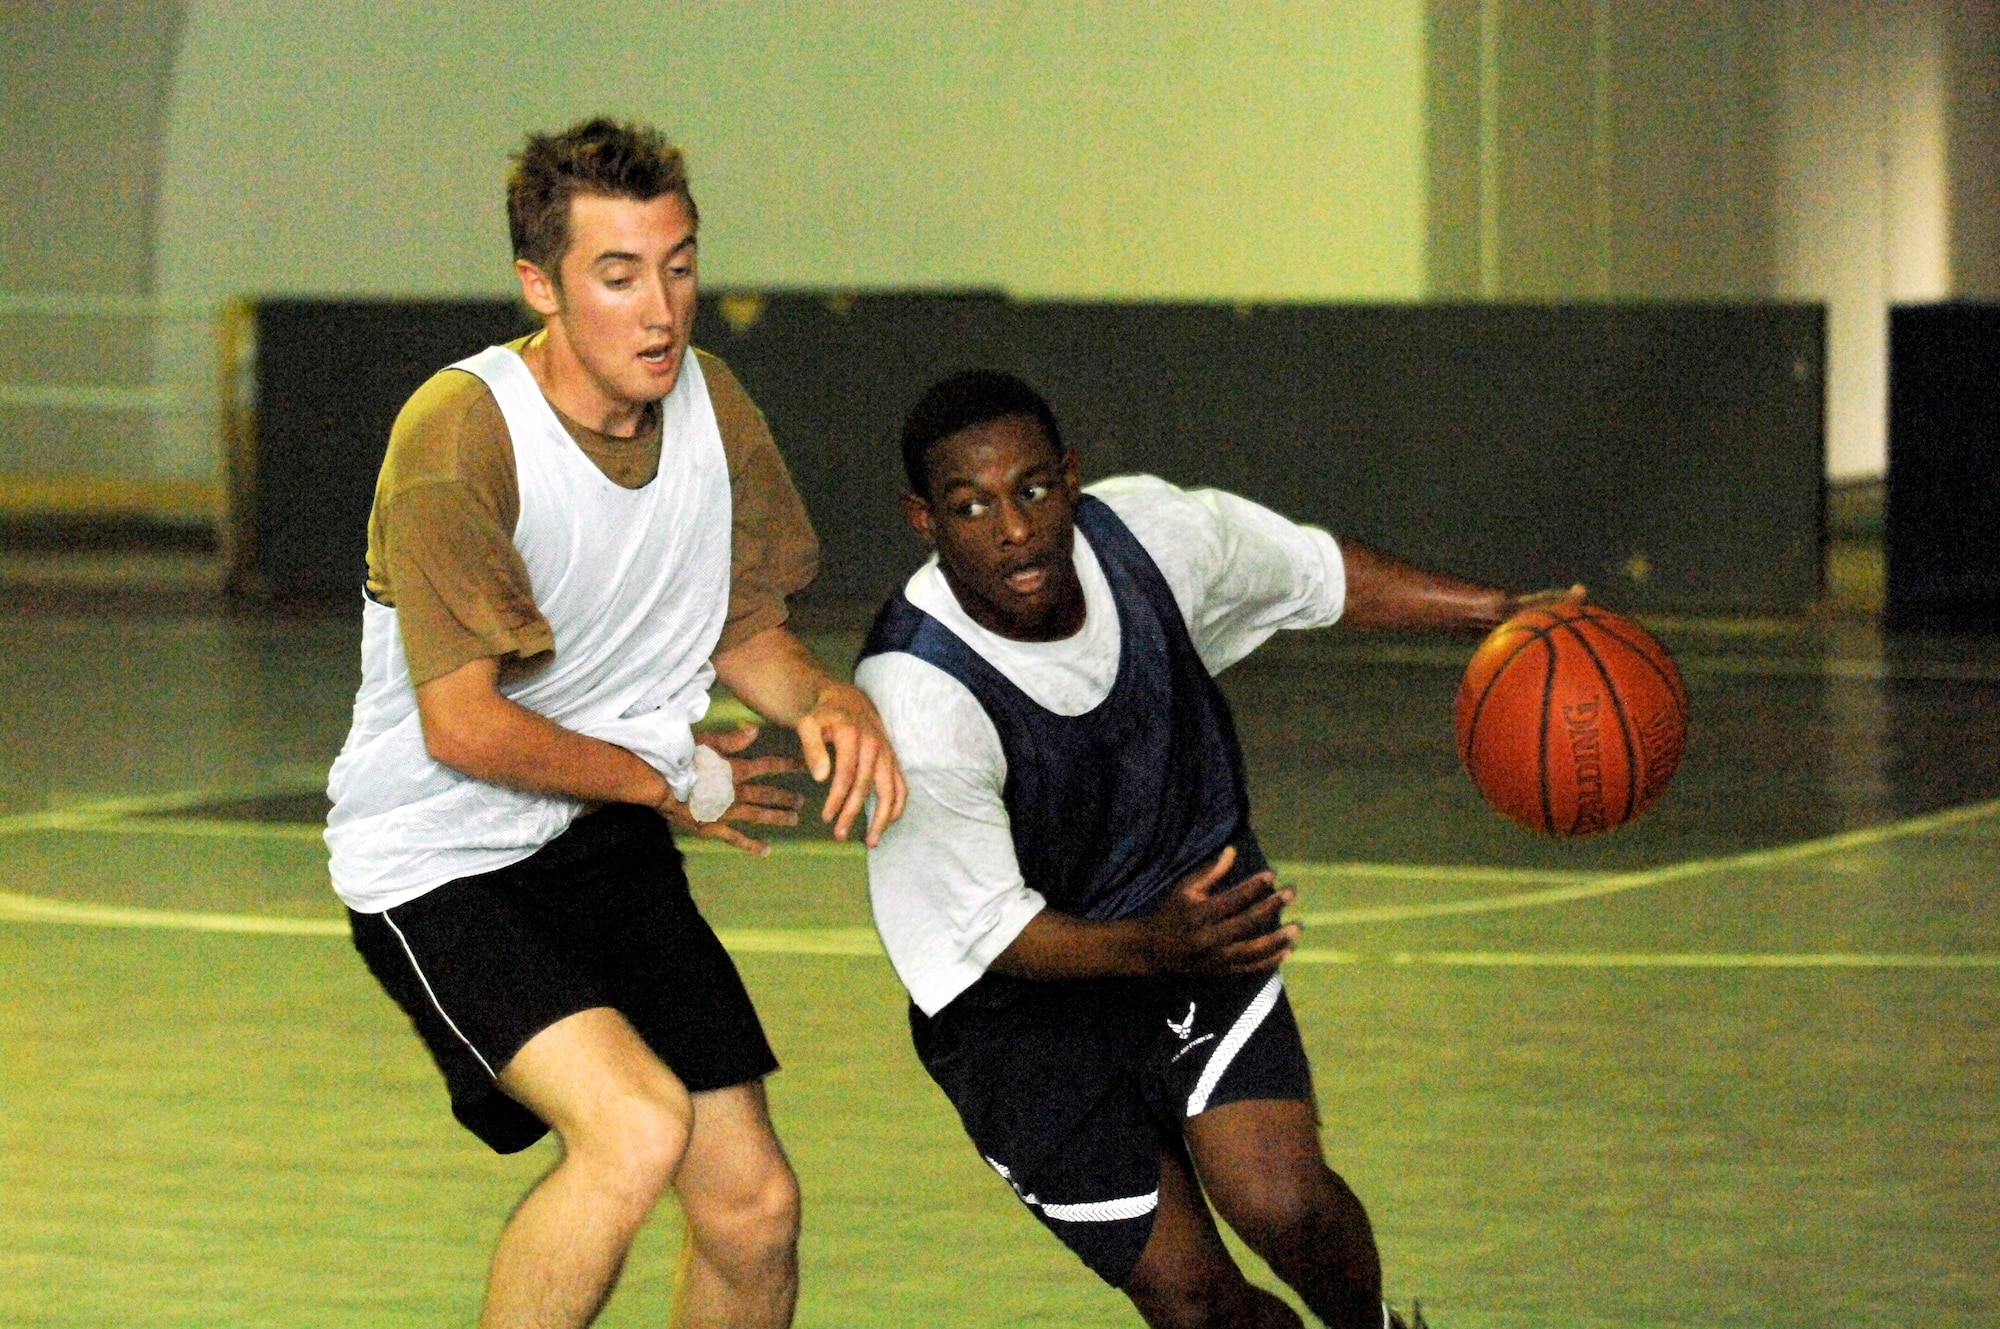 Senior Airman Michael Gray drives past an Australian team defender during the first-ever coalition games Aug. 20 at Camp Adder, Iraq. The Air Force team took third place in the event. The coalition games brought together different sport teams from the Air Force, Army, Navy, Australians and the Romanians to compete for the bragging rights as the best on base. The Air Force came out on top taking first place in five events. Airman Gray is a member of the 407th Security Forces Squadron at Ali Base, Iraq. (U.S. Air Force photo/Master Sgt. Robert W. Valenca)
